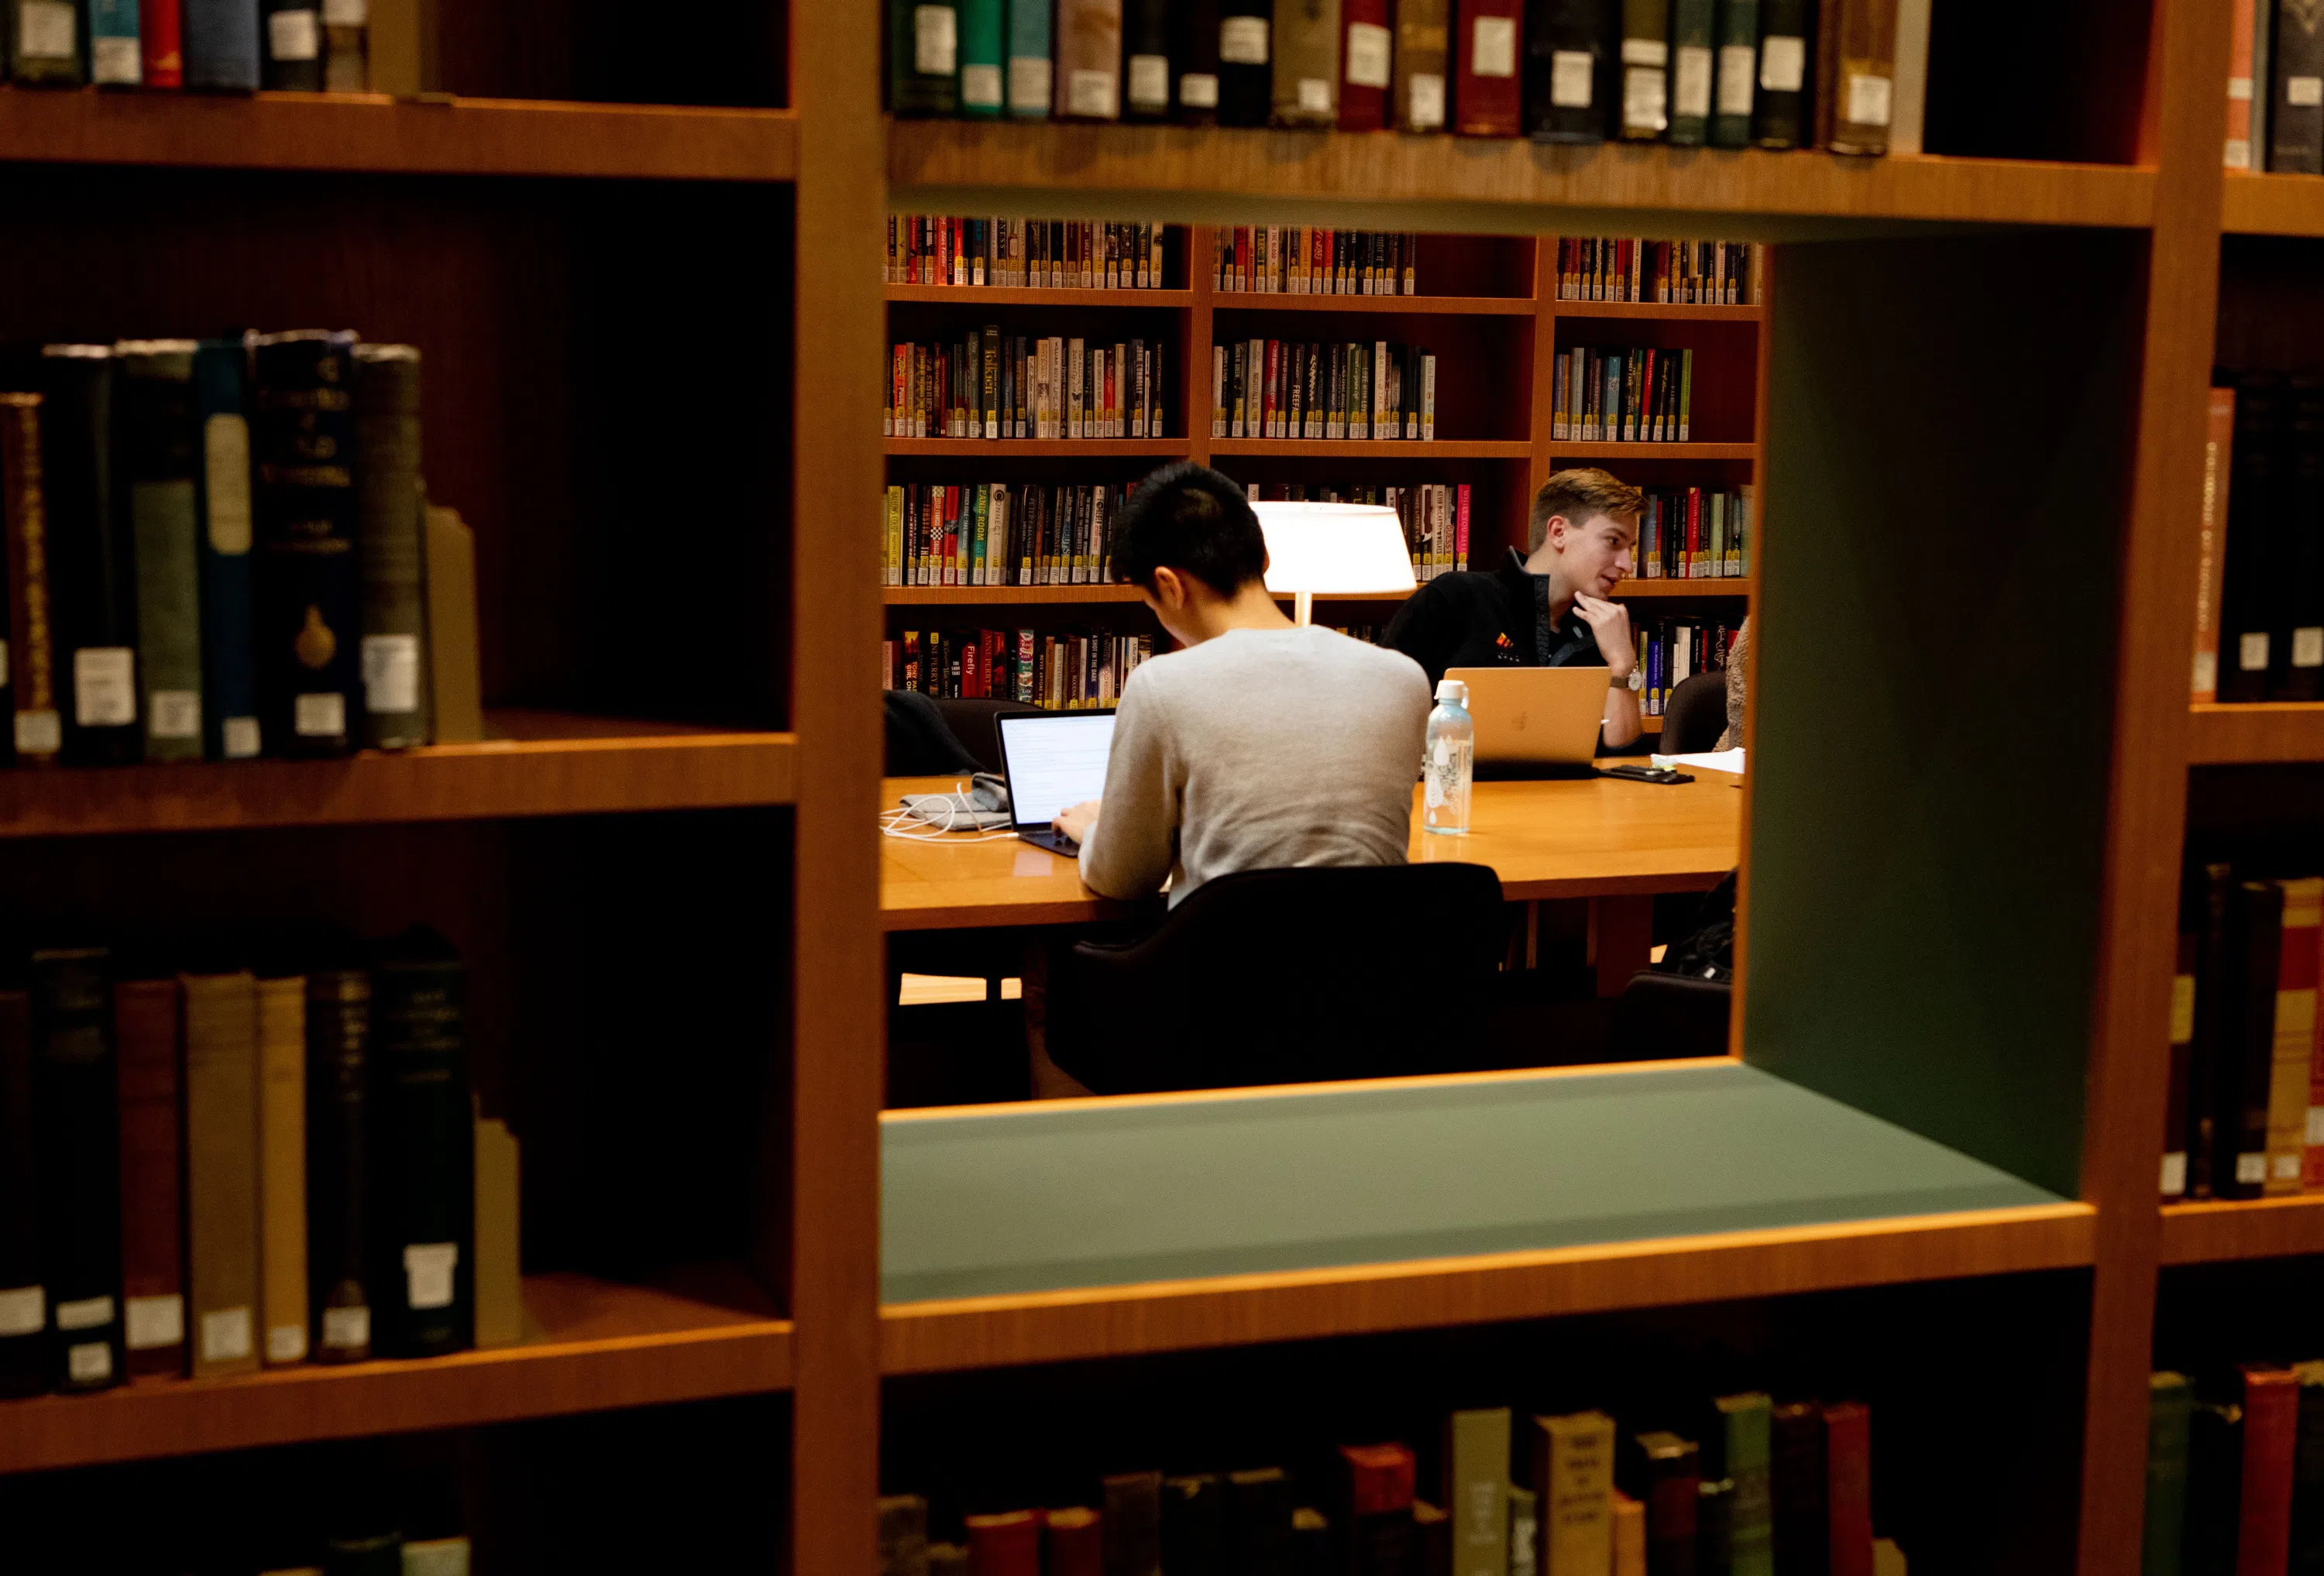 Students in Shelves